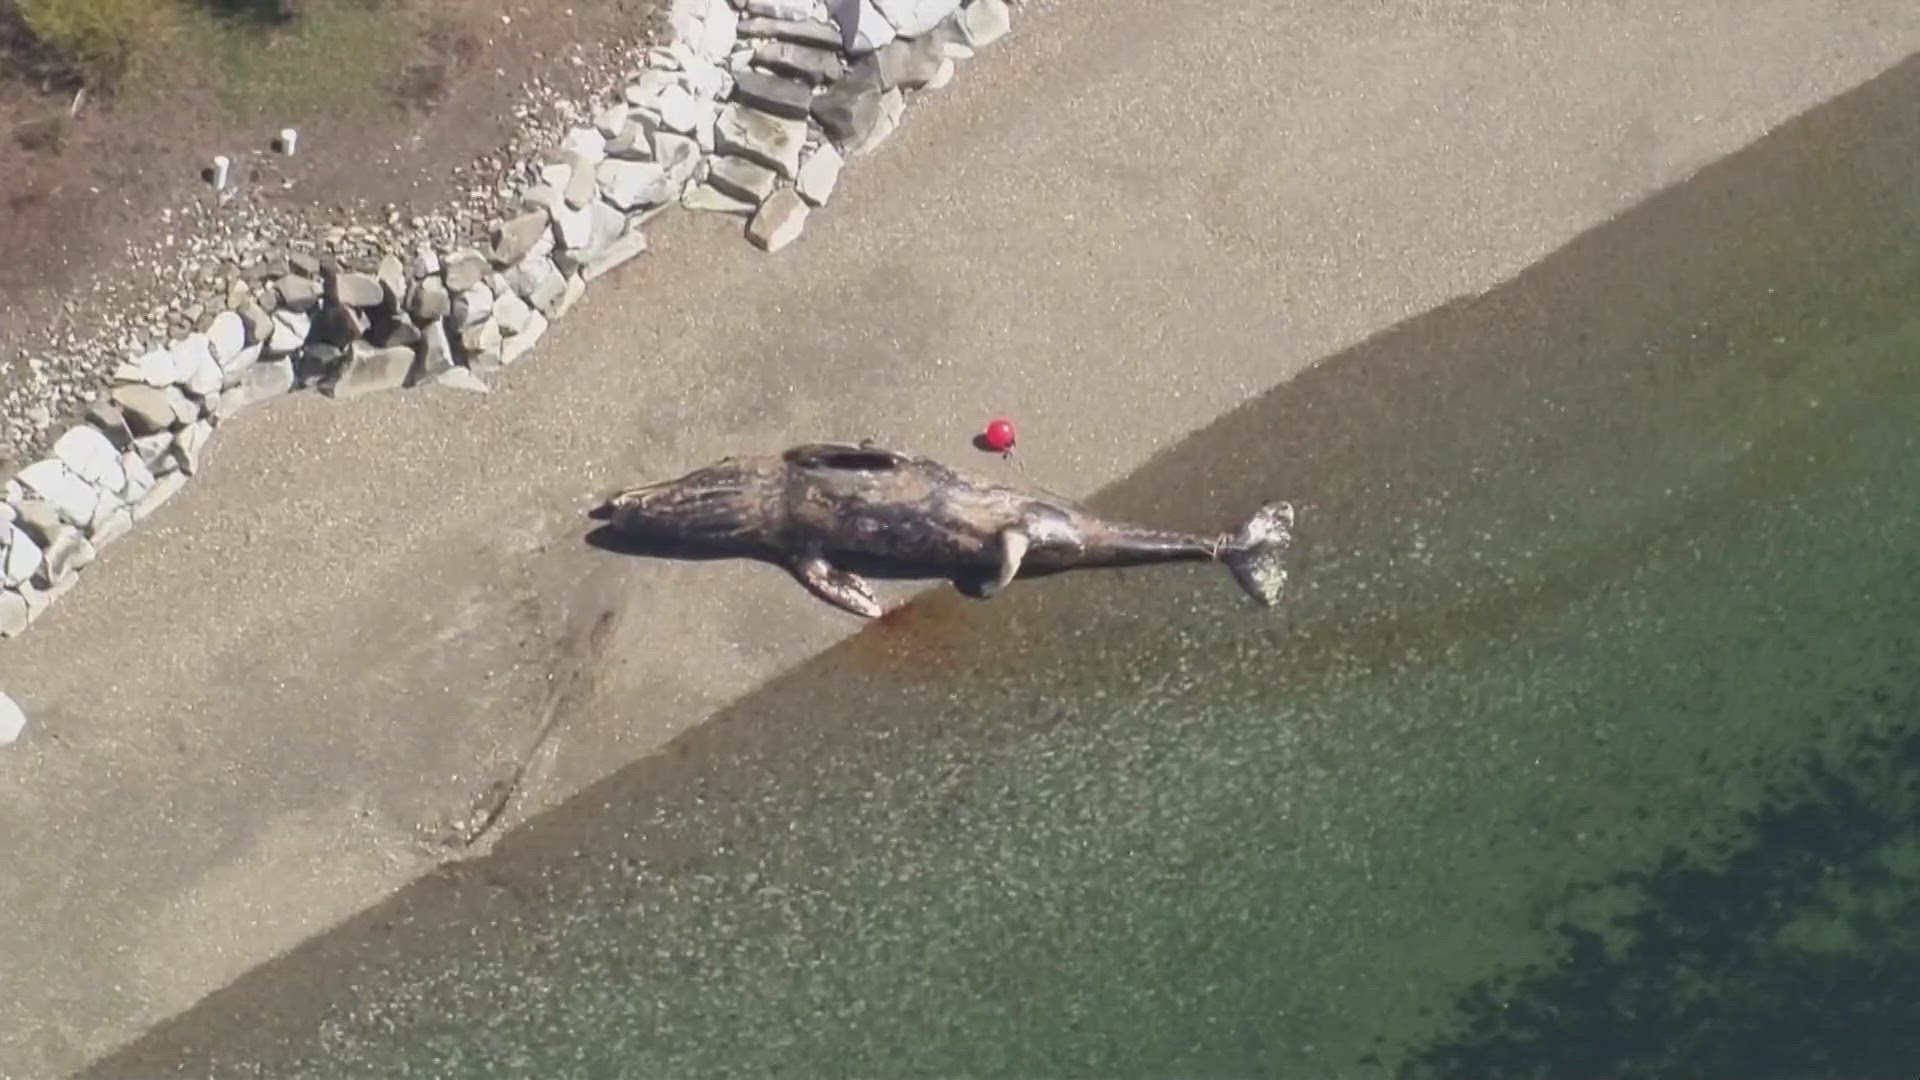 Researchers are examining a dead gray whale that washed ashore on Fox Island on April 1.